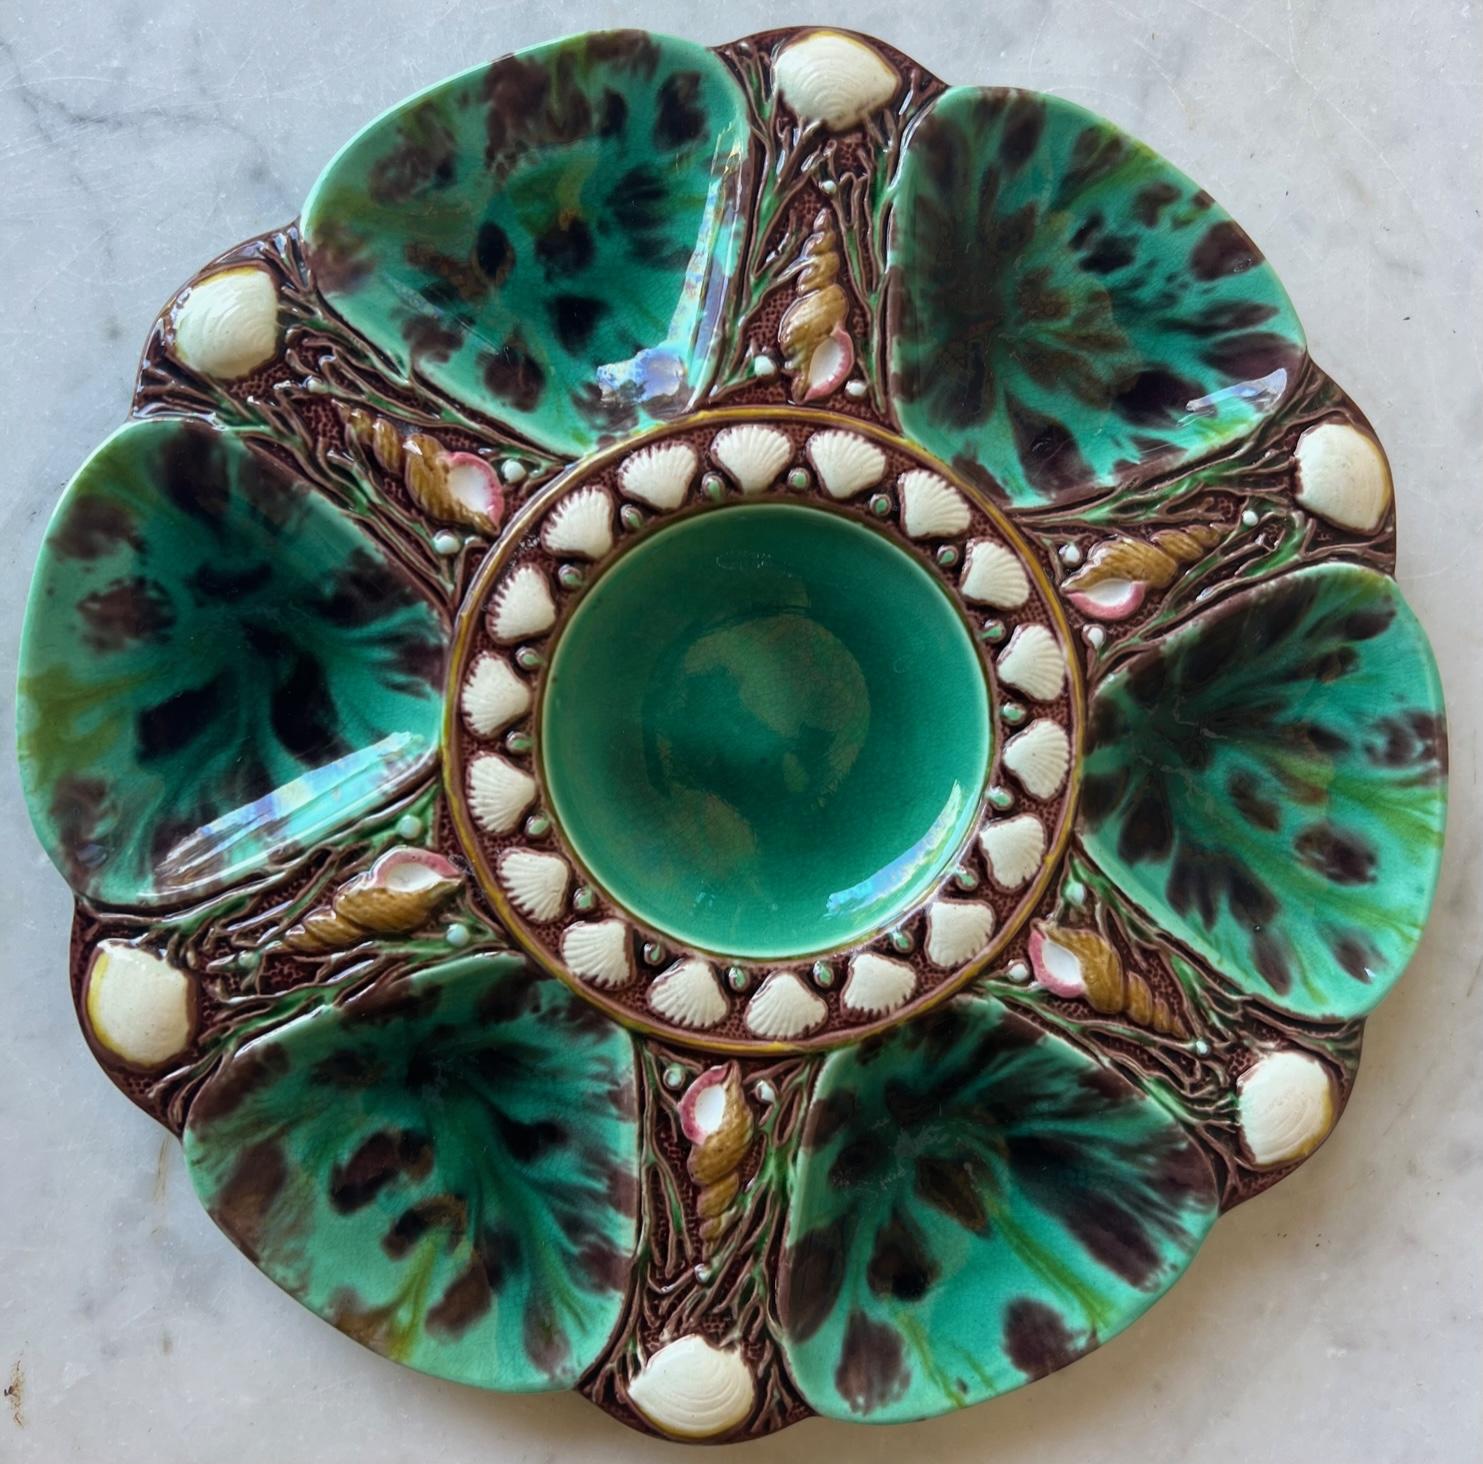 Antique Minton Green Majolica Oyster Plate, circa 1860's-1870's For Sale 9